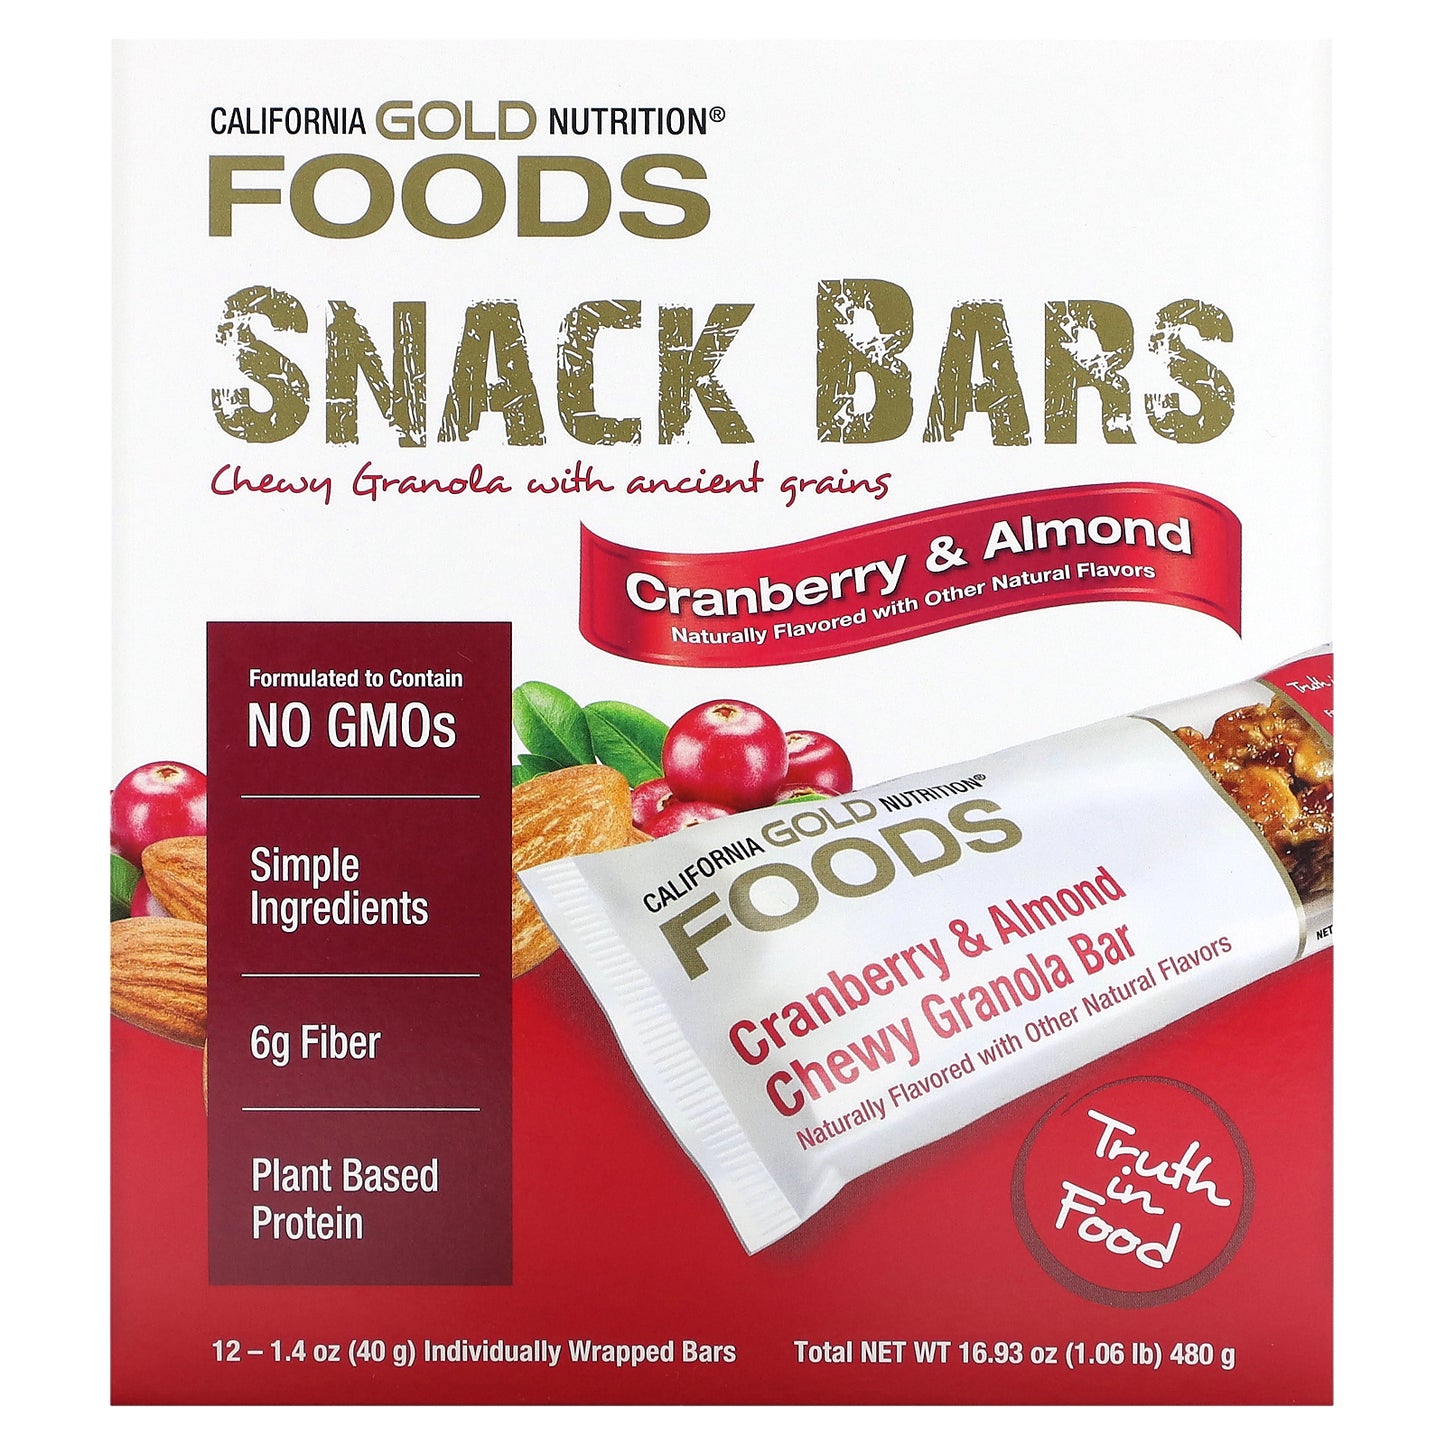 California Gold Nutrition, FOODS - Cranberry & Almond Chewy Granola Bars, 12 Bars, 1.4 oz (40 g) Each